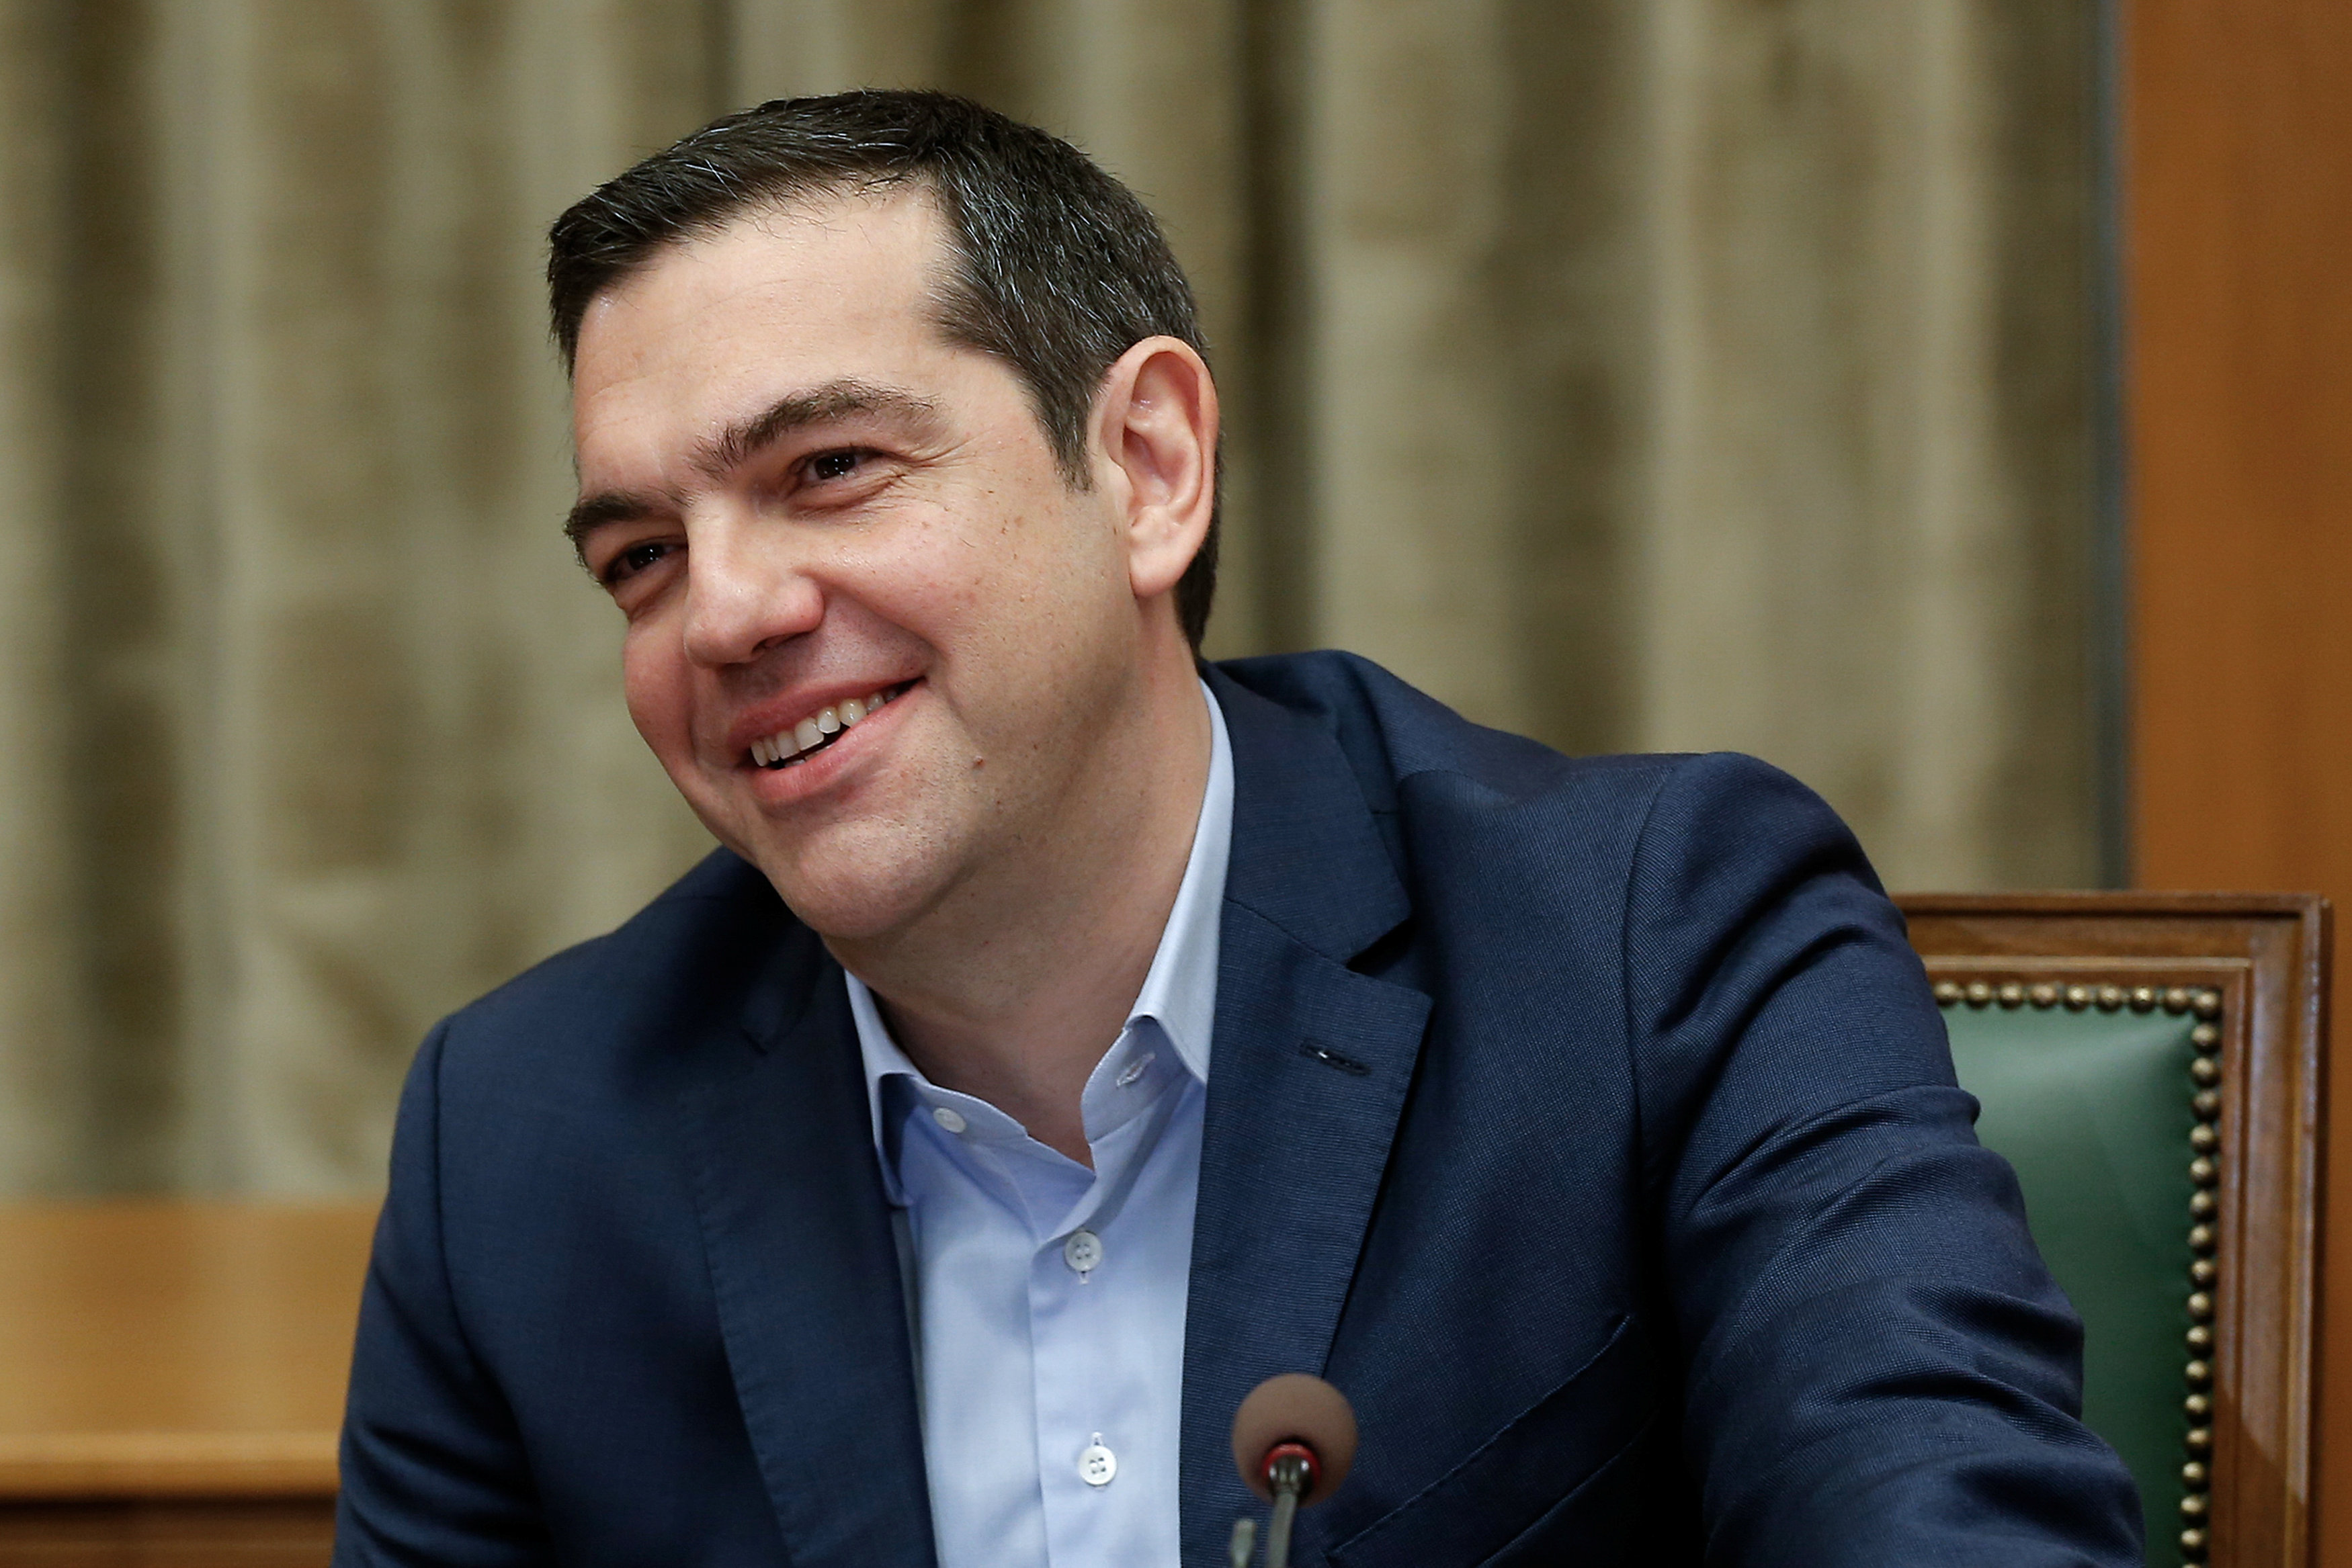 Tsipras to address economic conference on Lesvos, visit Lemnos